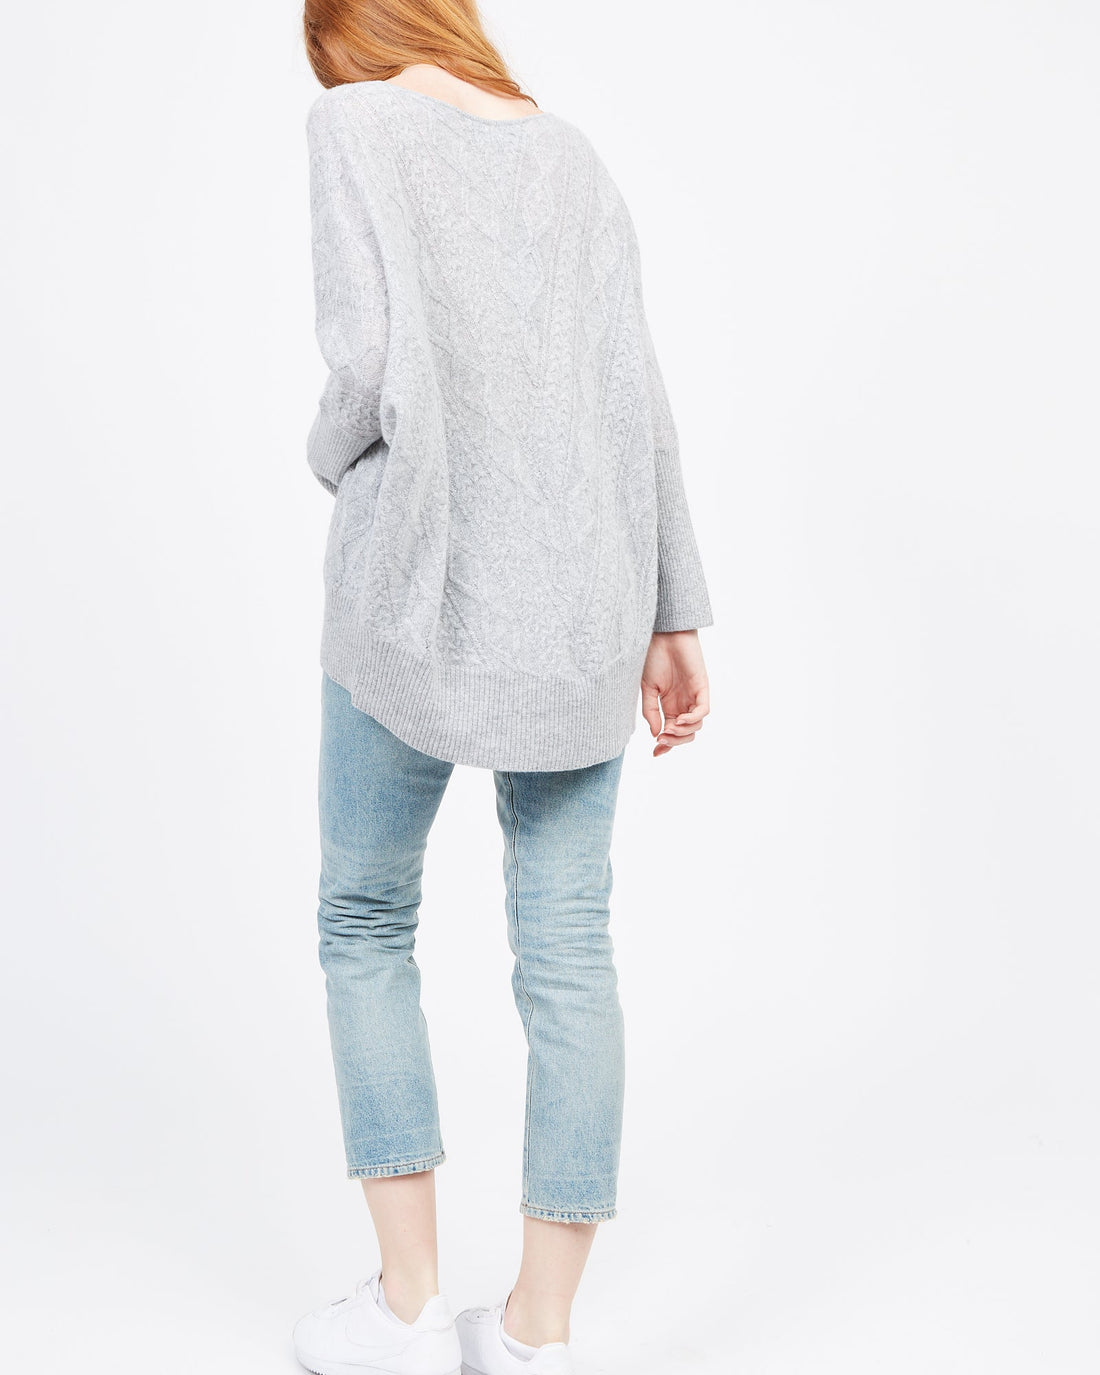 HiLow sweater grey cable stitch